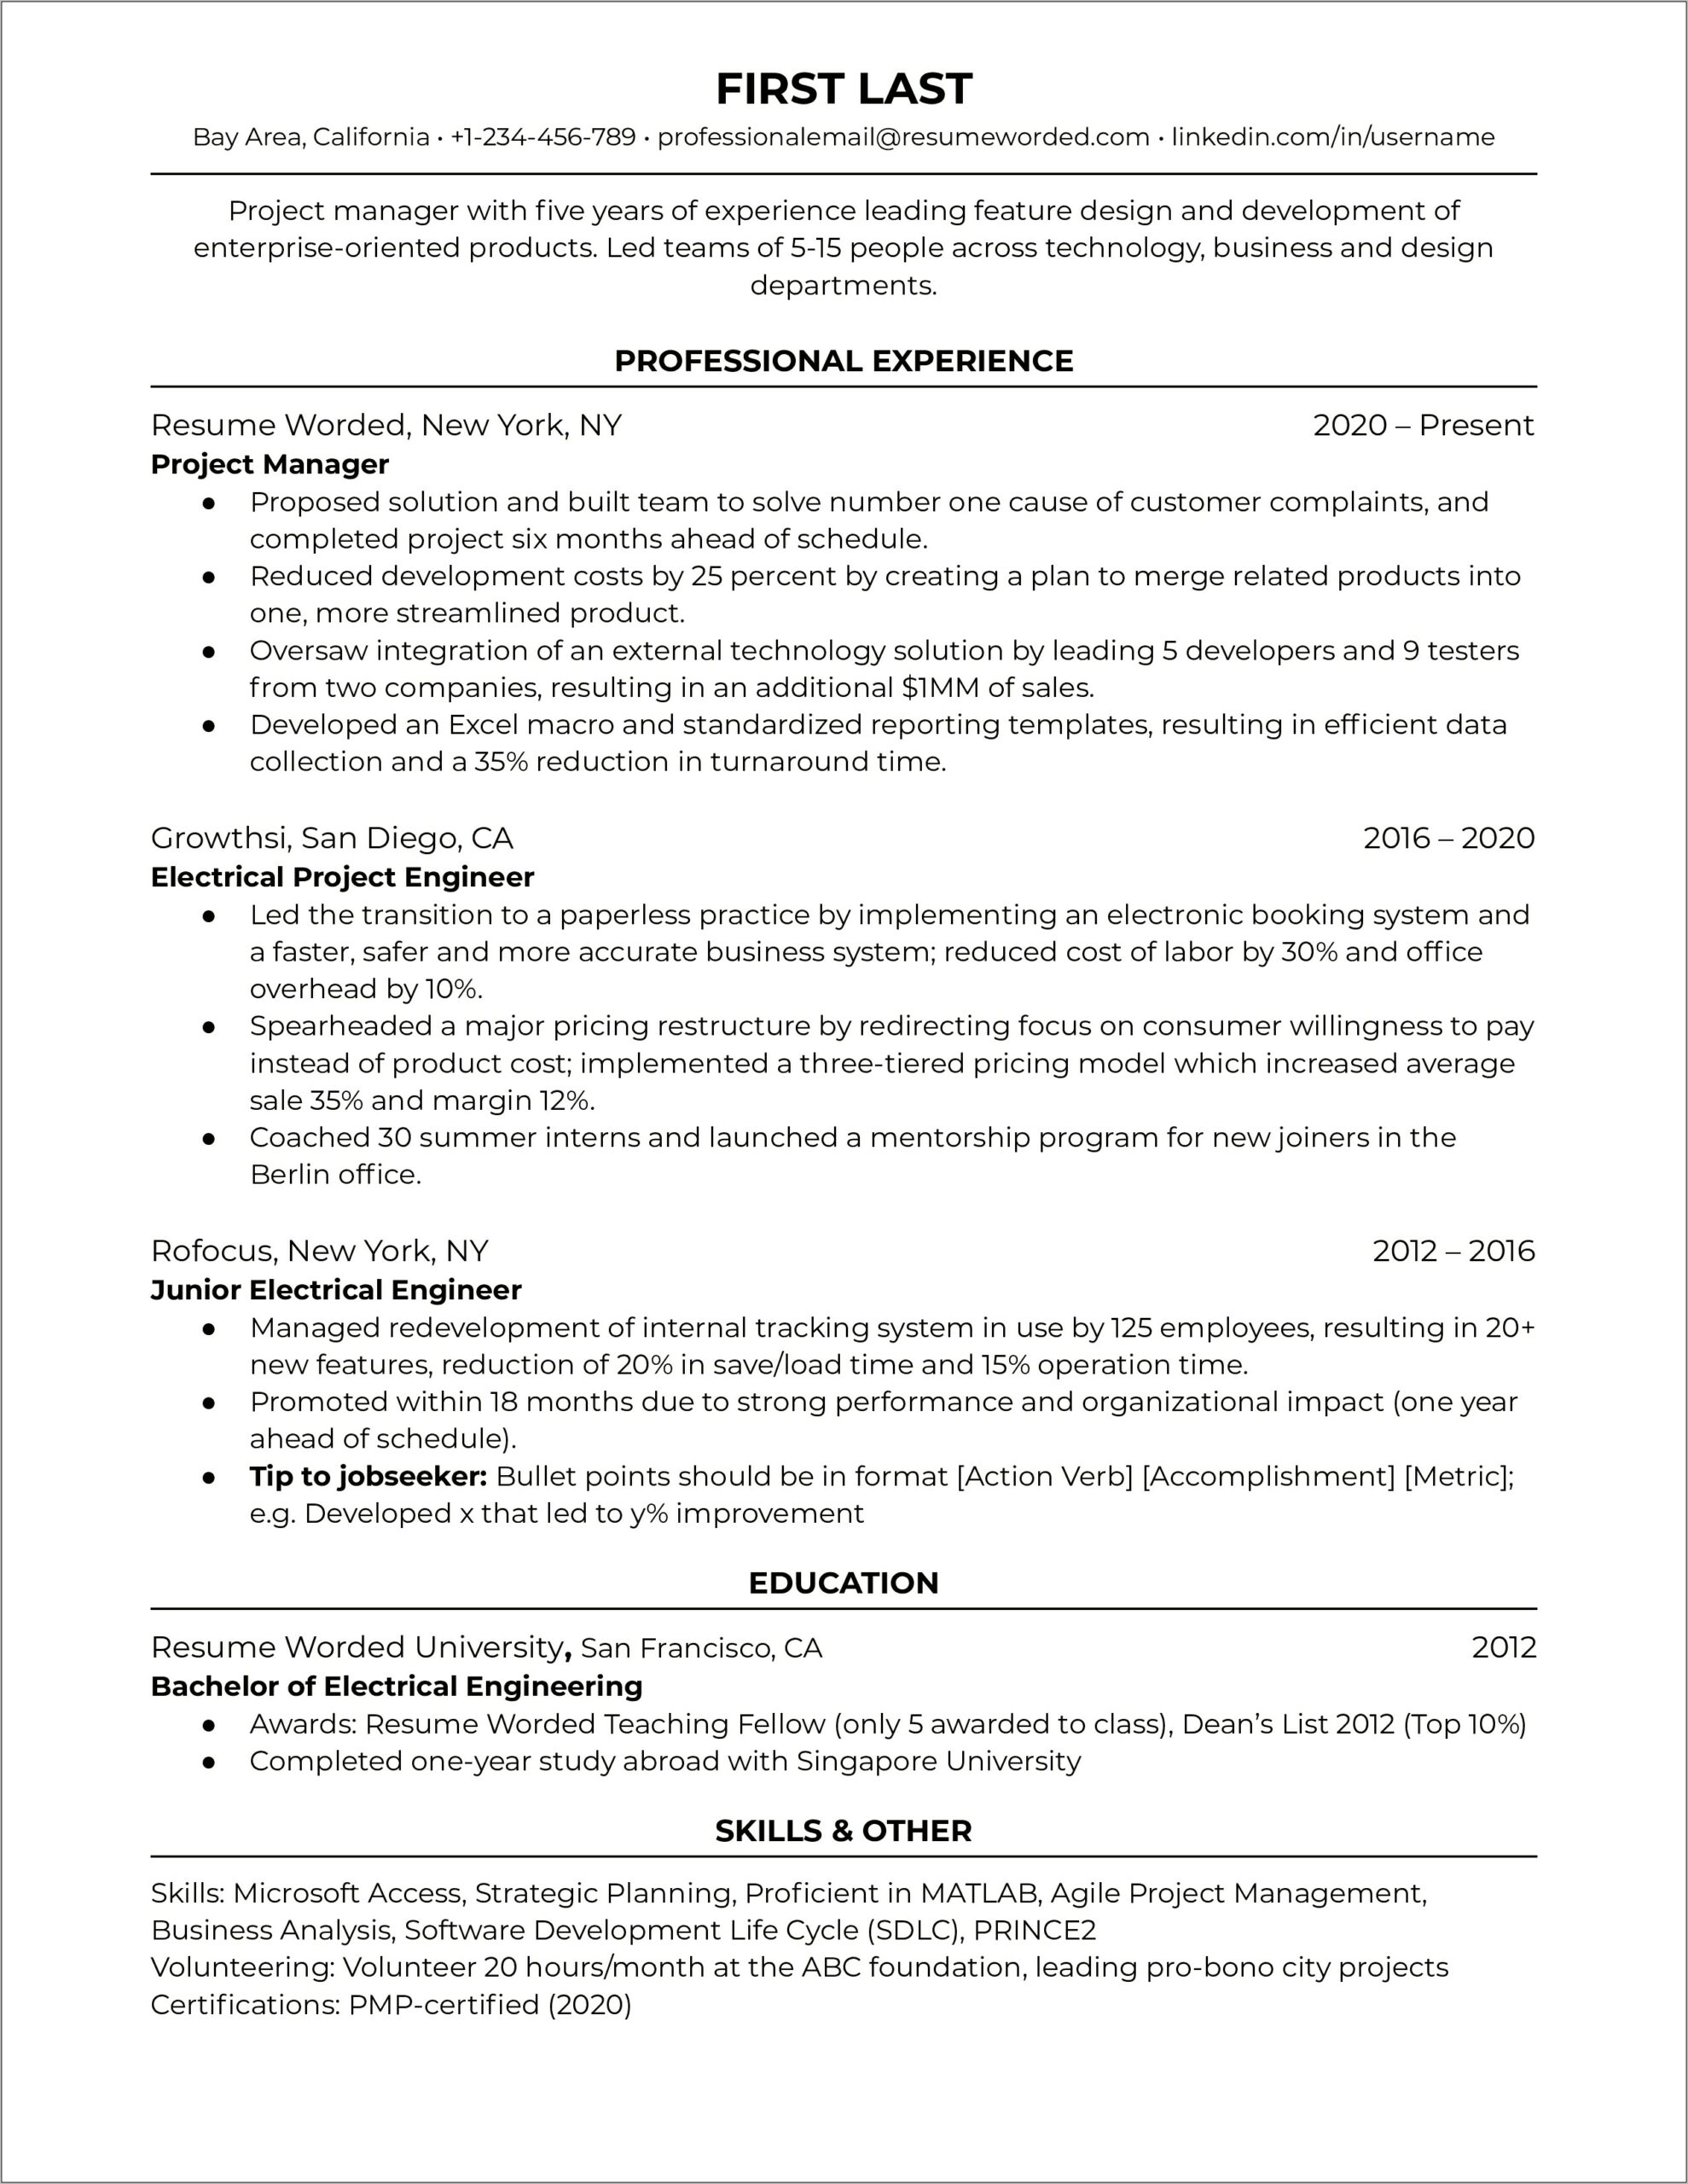 Project Manager Keywords For Resume